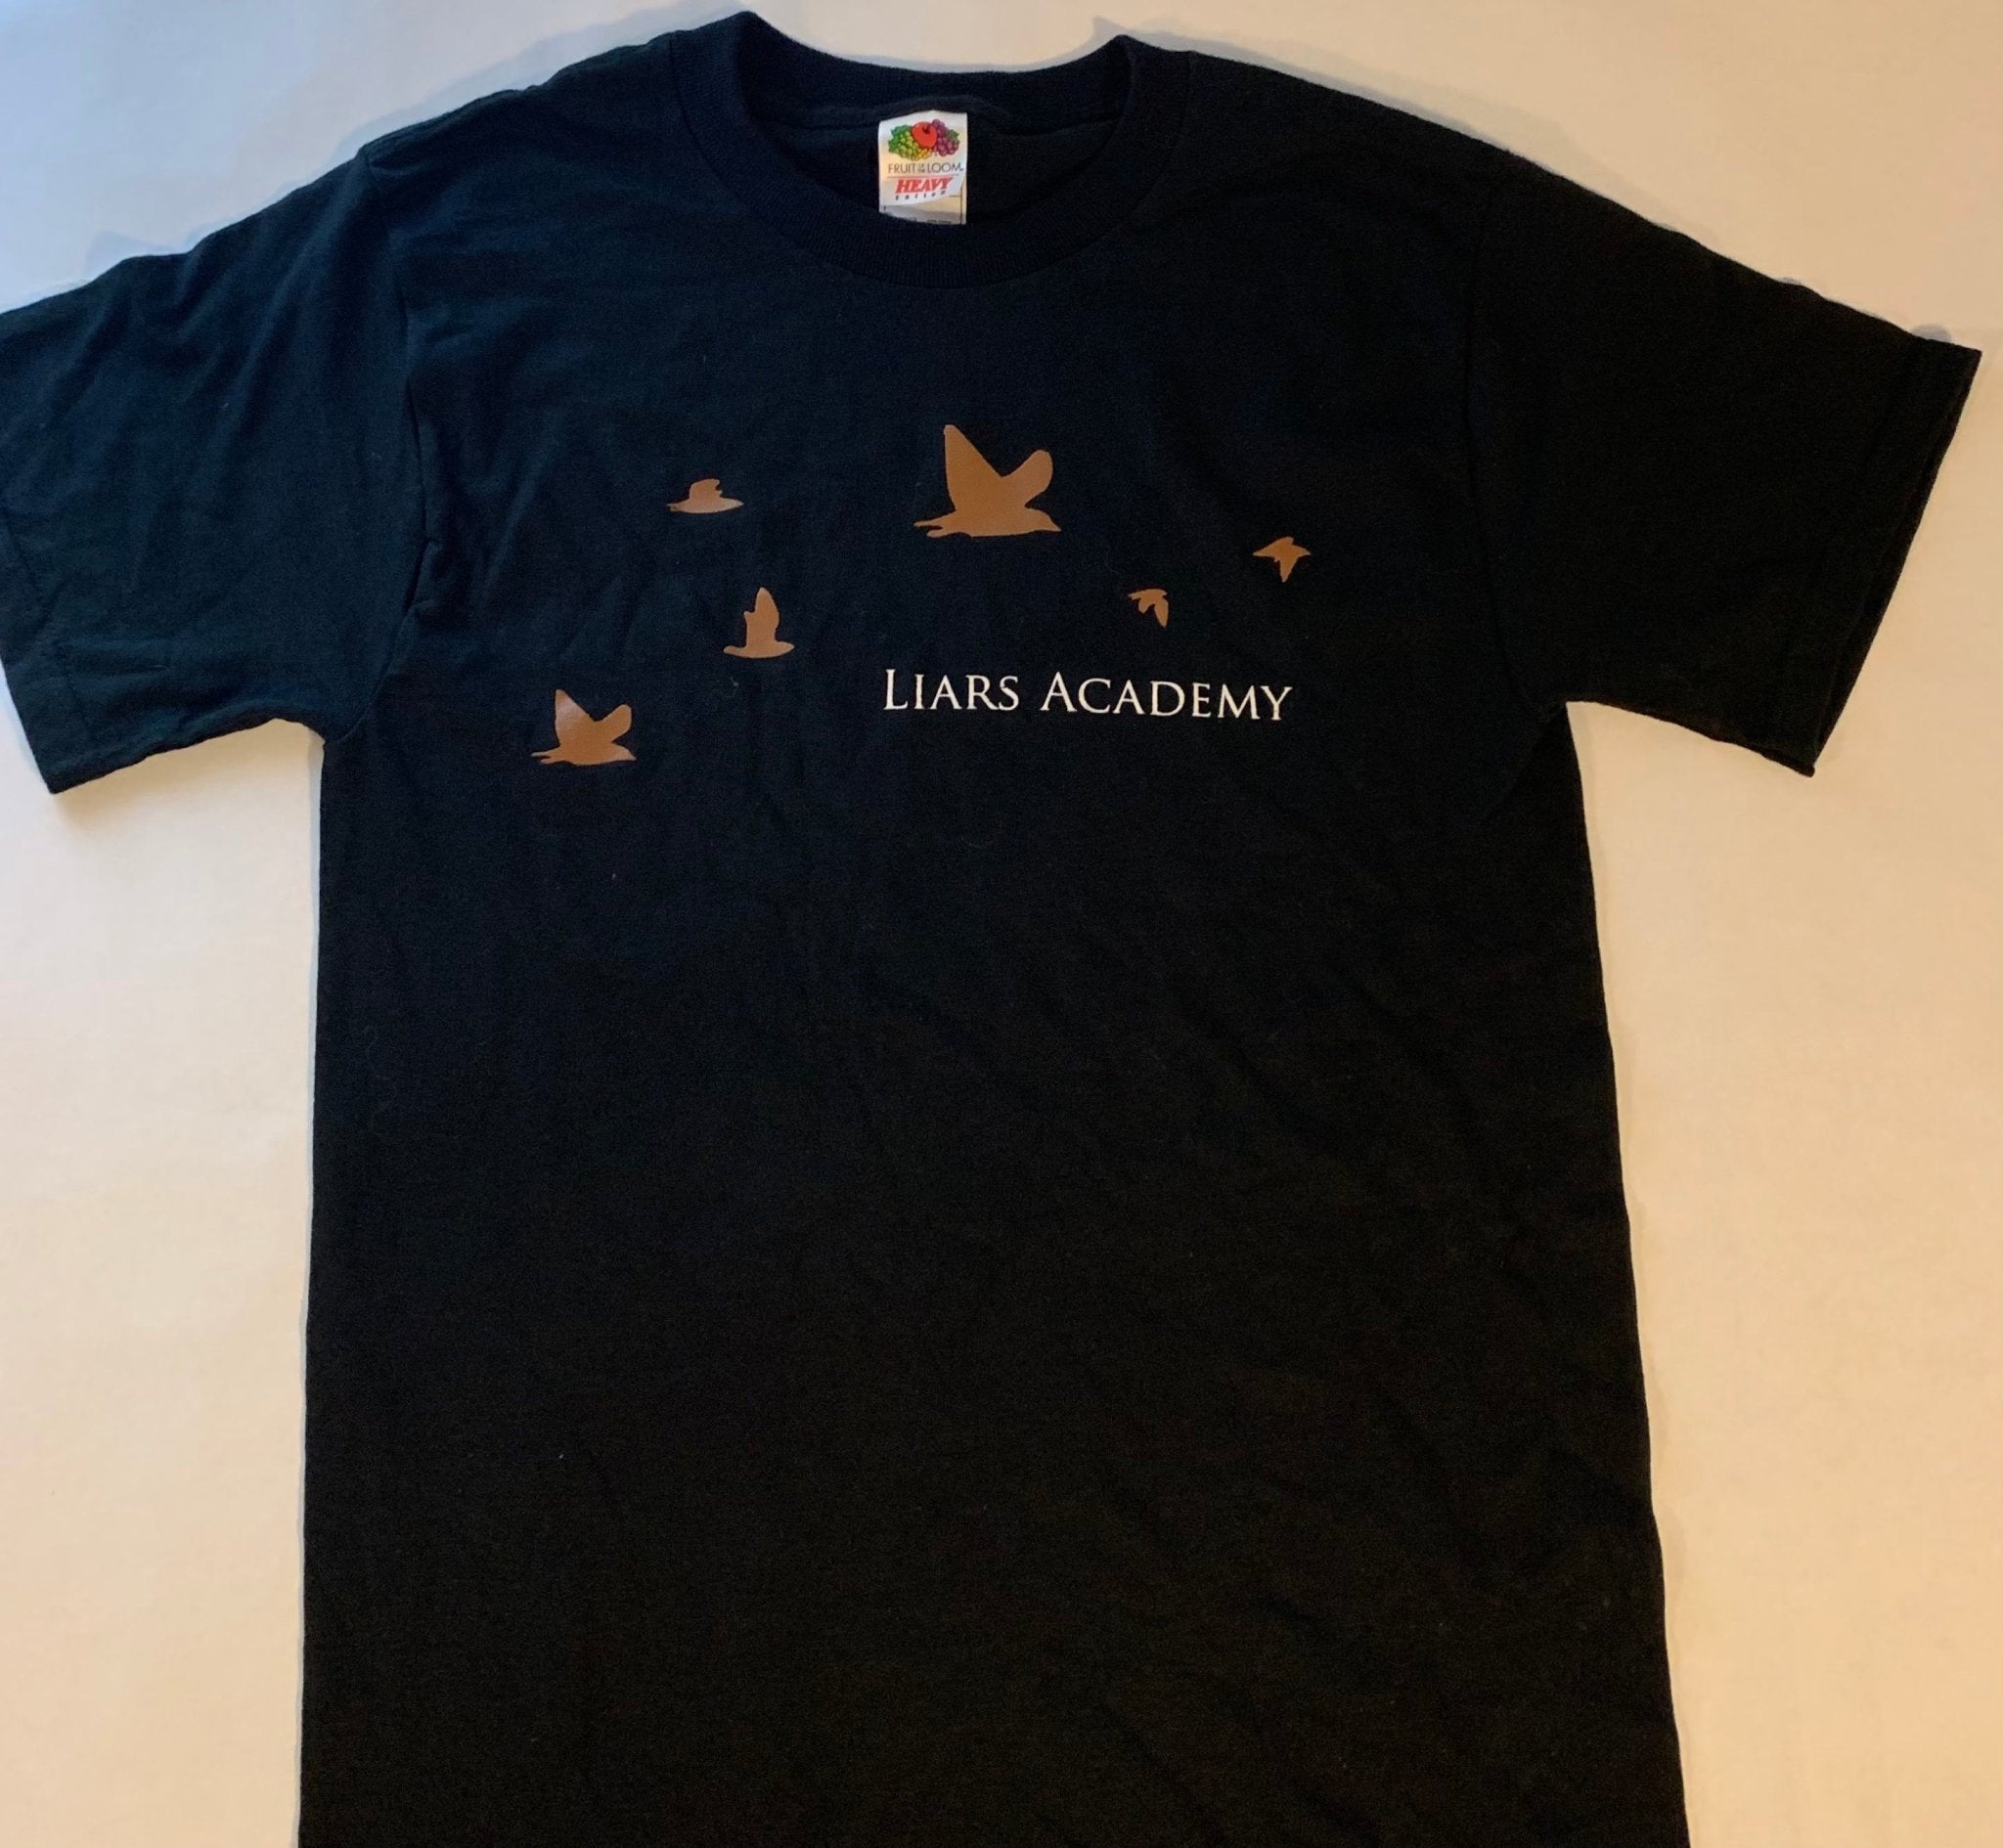 Liars Academy: Birds (Demons) T-Shirt (S or M) - Steadfast Records